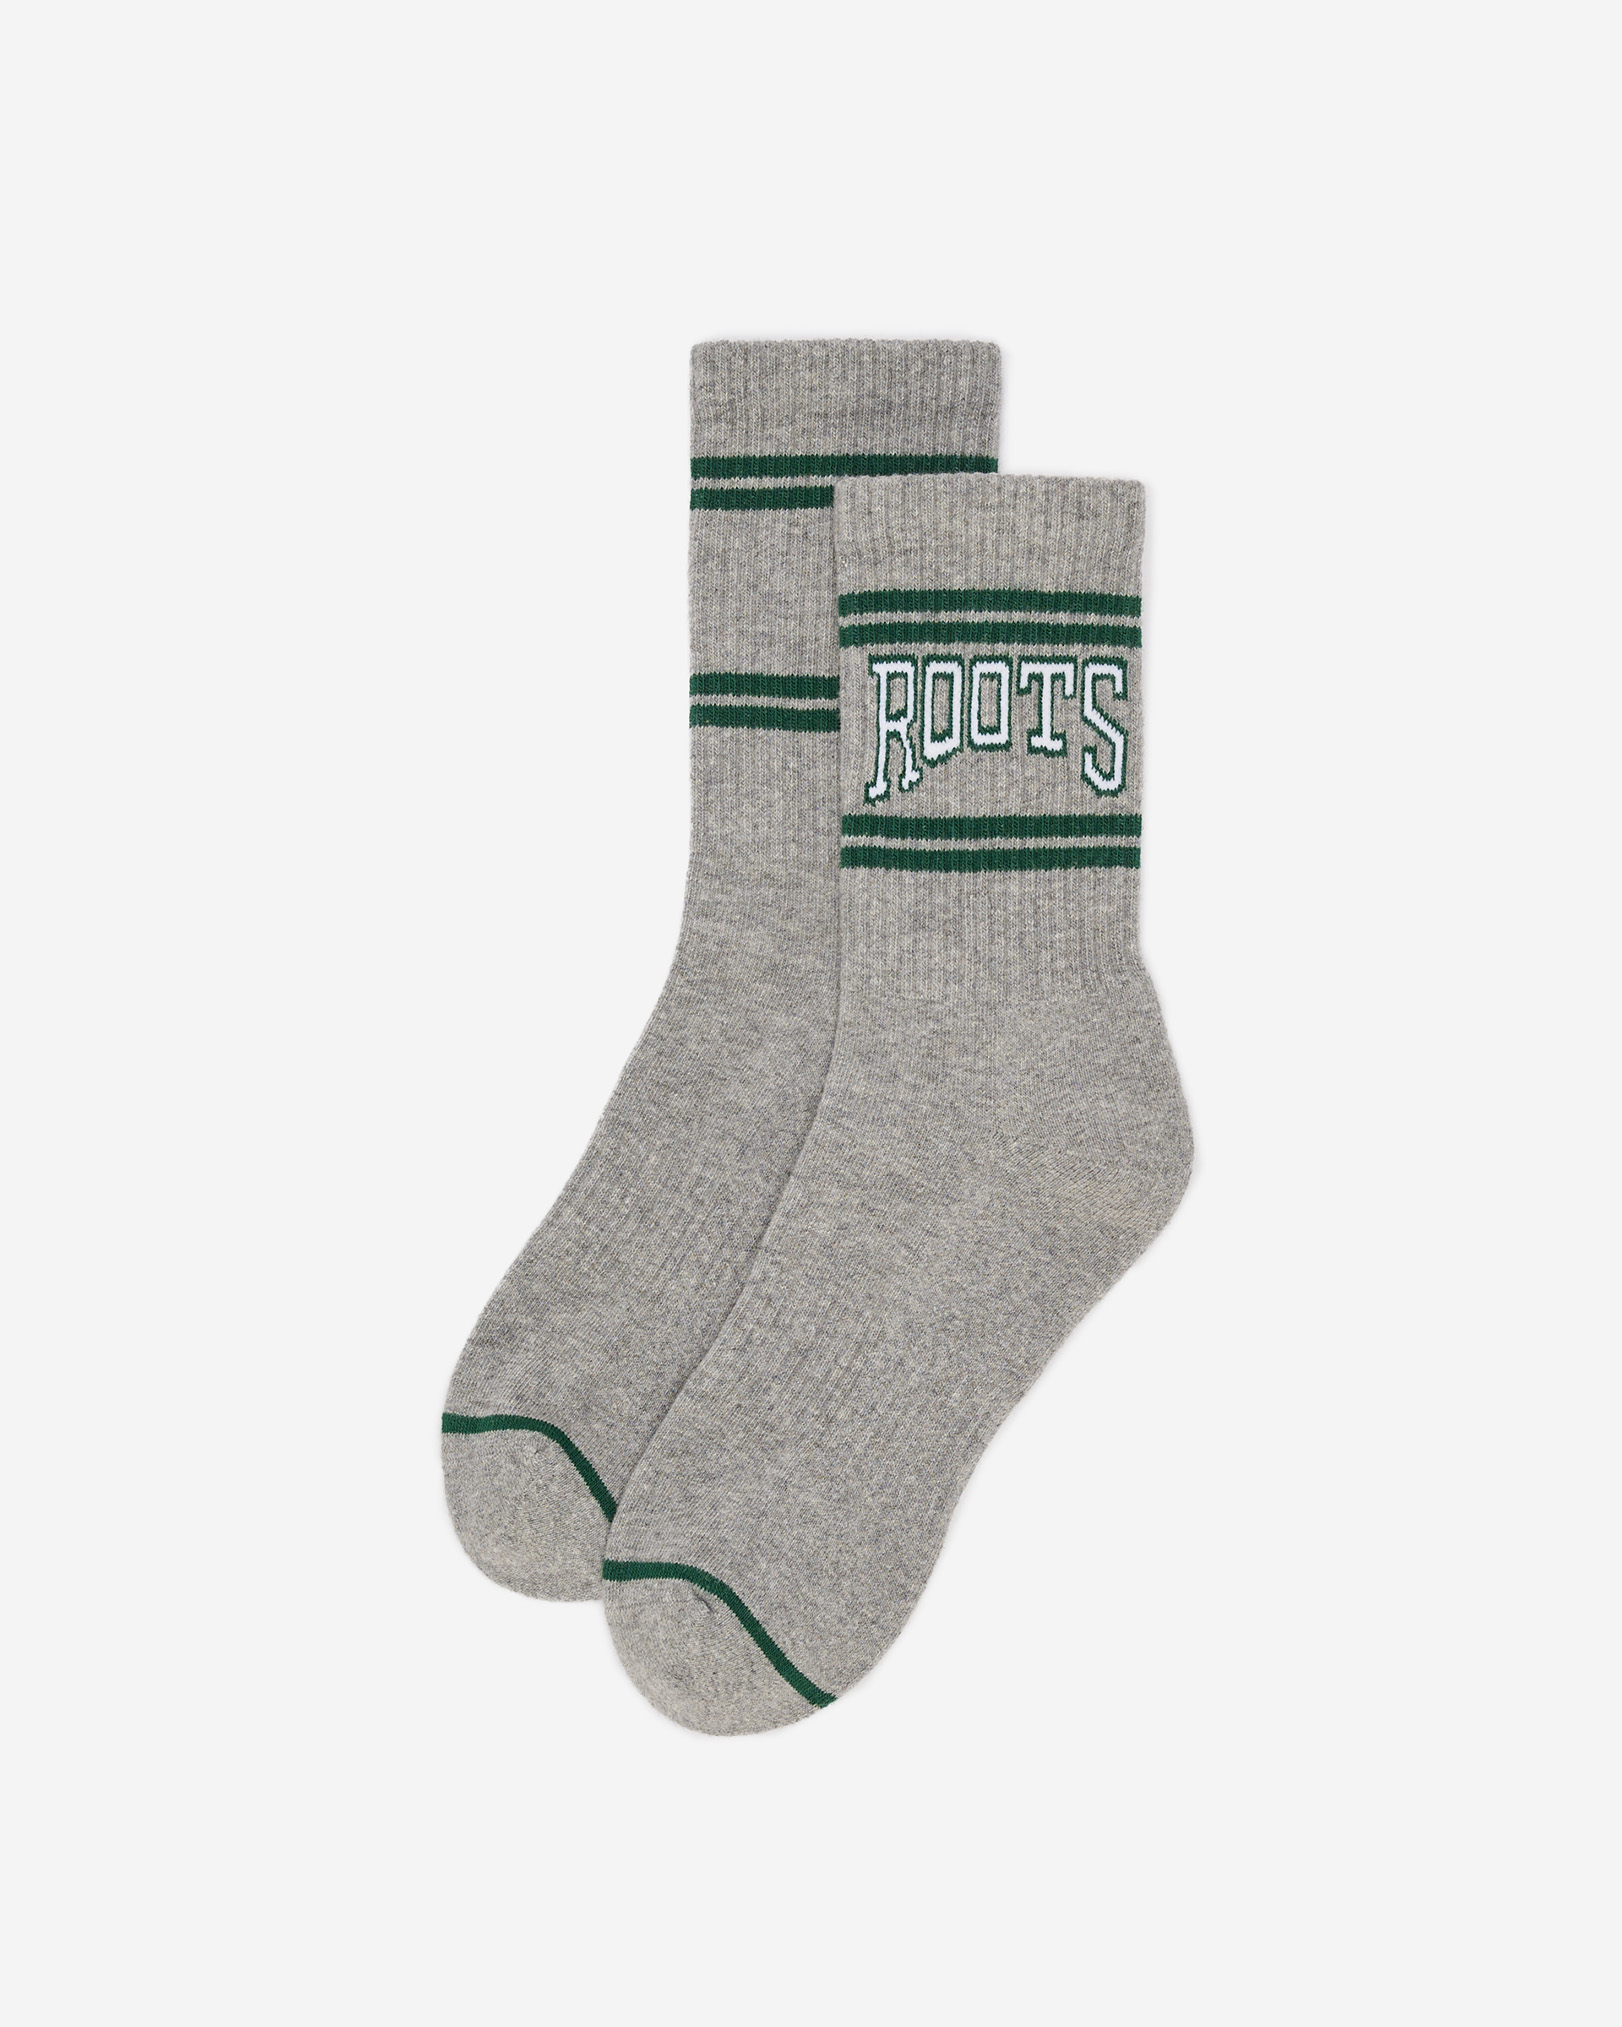 Roots Adult Novelty Athletic Sock in Grey Mix